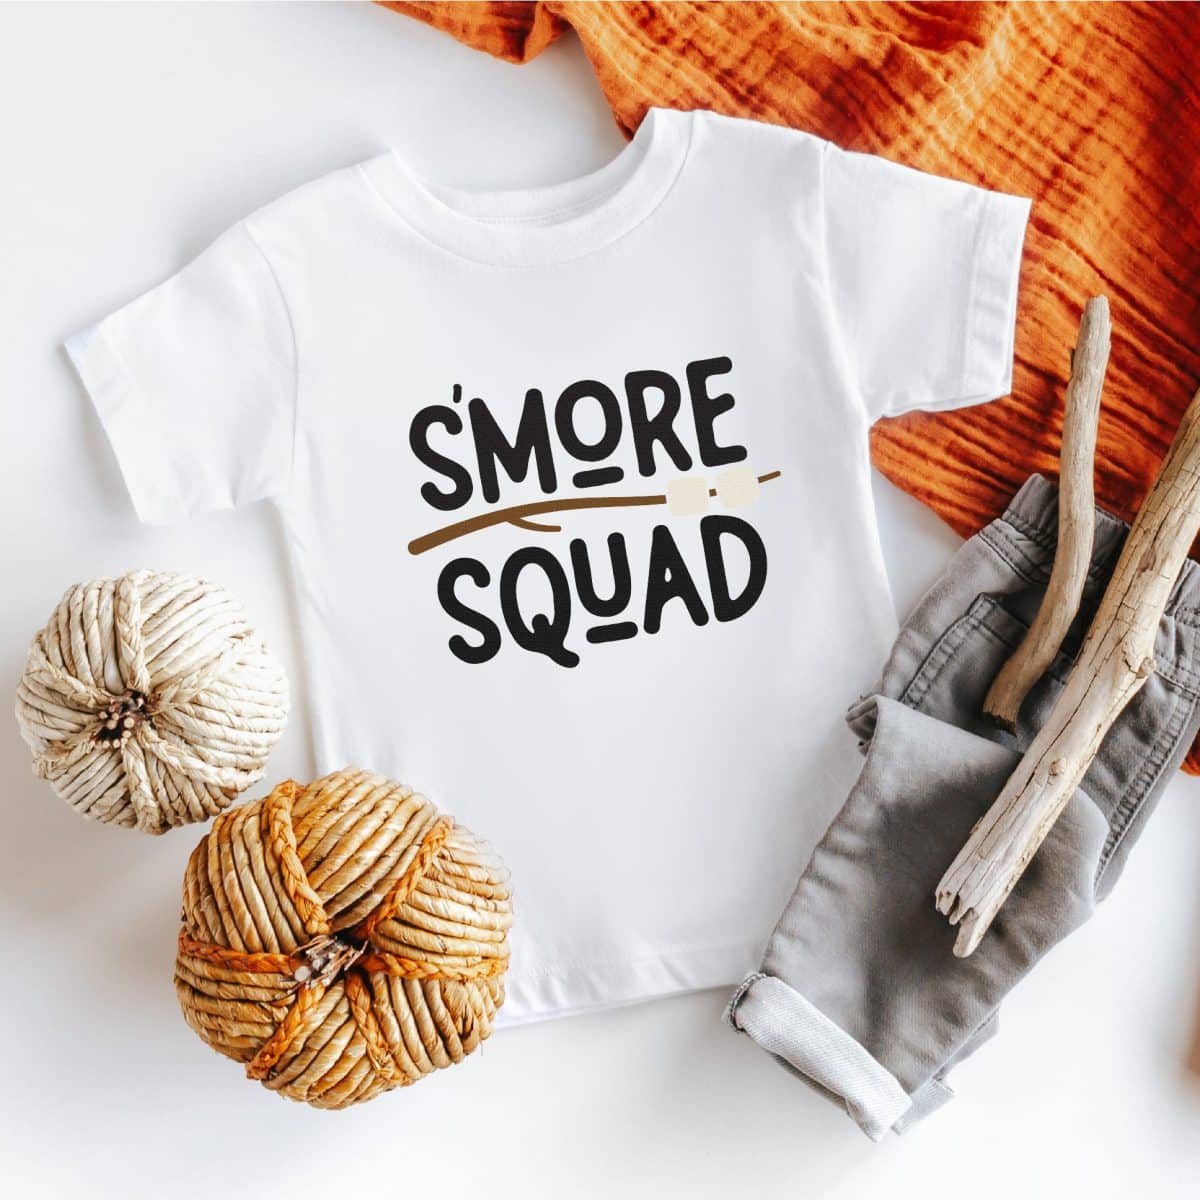 S'more Squad Shirt by Hey Let's Make Stuff